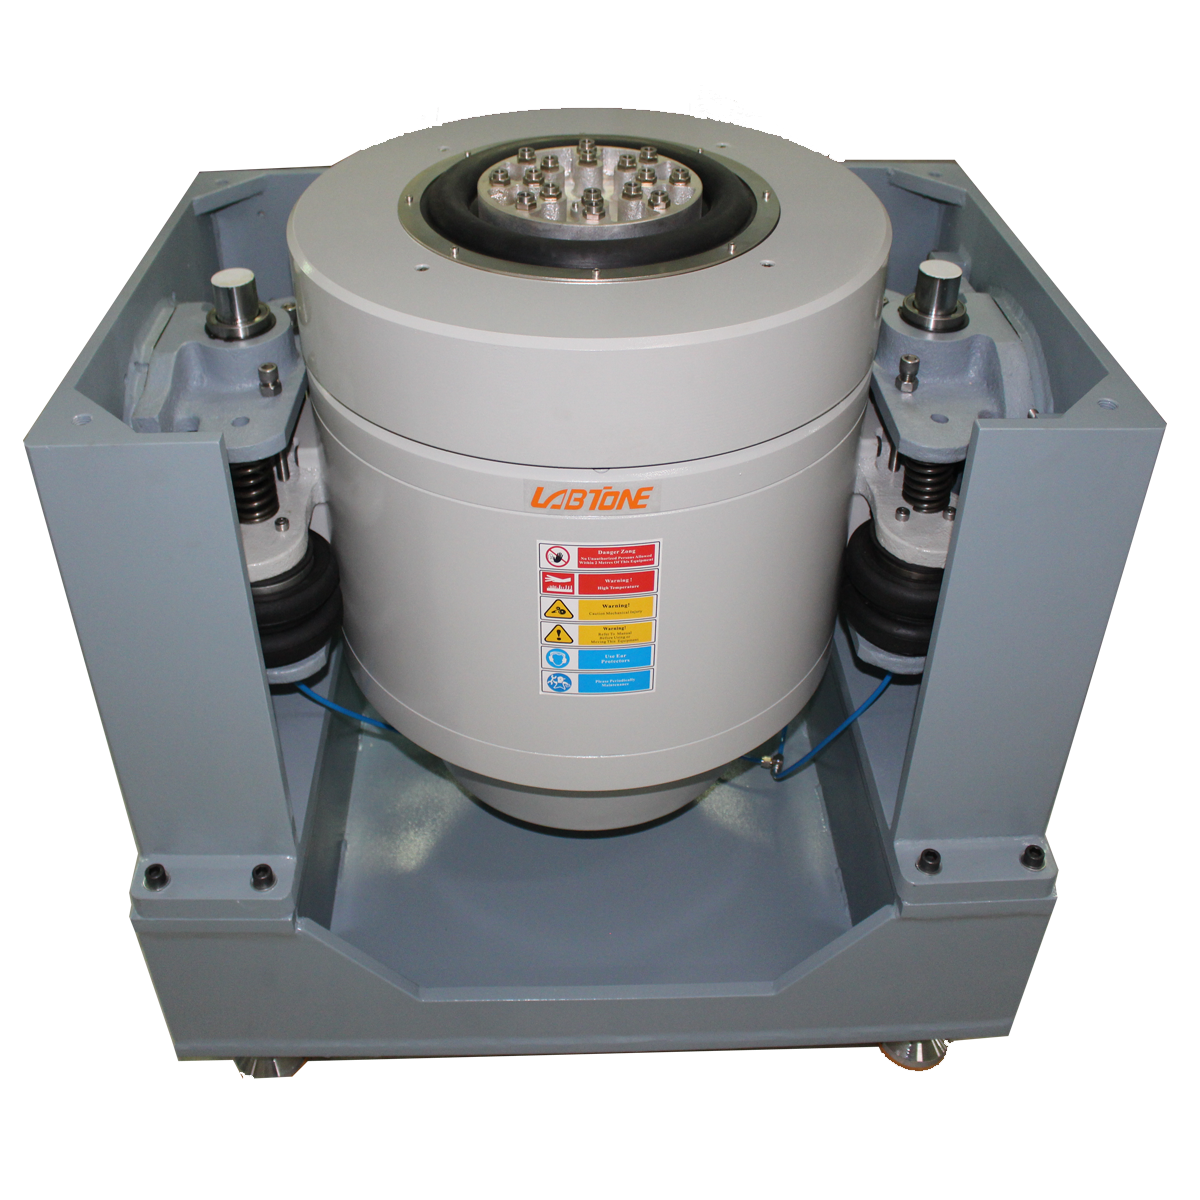 High Force Shakers Vibration Test System 2-2500 Hz Frequency Range